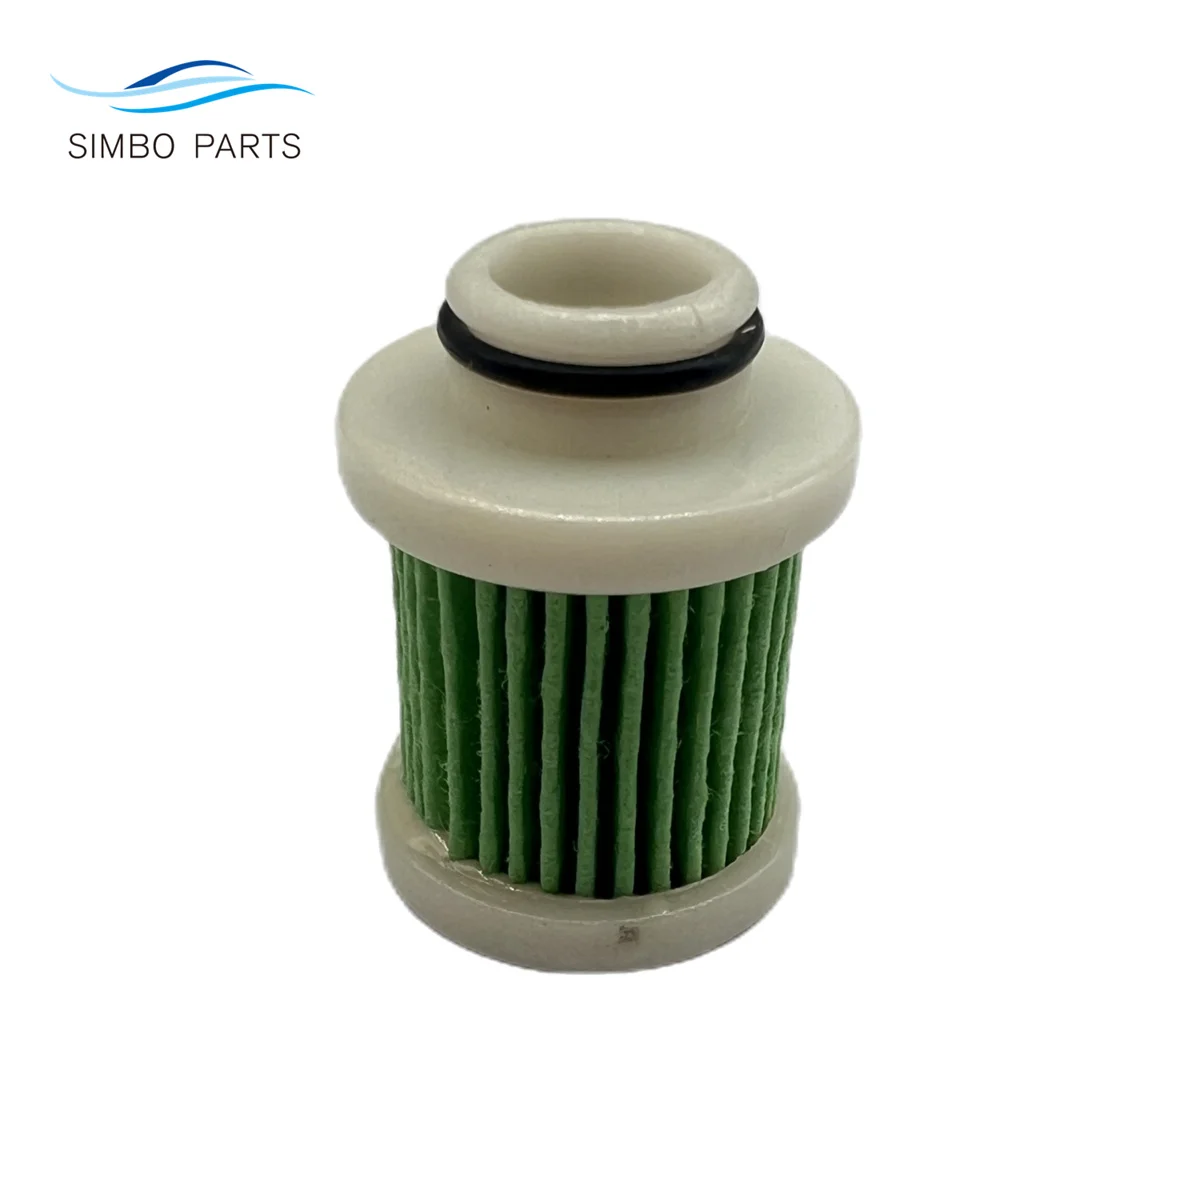 

6D8-WS24A-00 Primary Fuel Filter Element For Yamaha 4-Stroke 25-130 HP Outboard Motor 6D8-24563-00 Sierra 18-79799